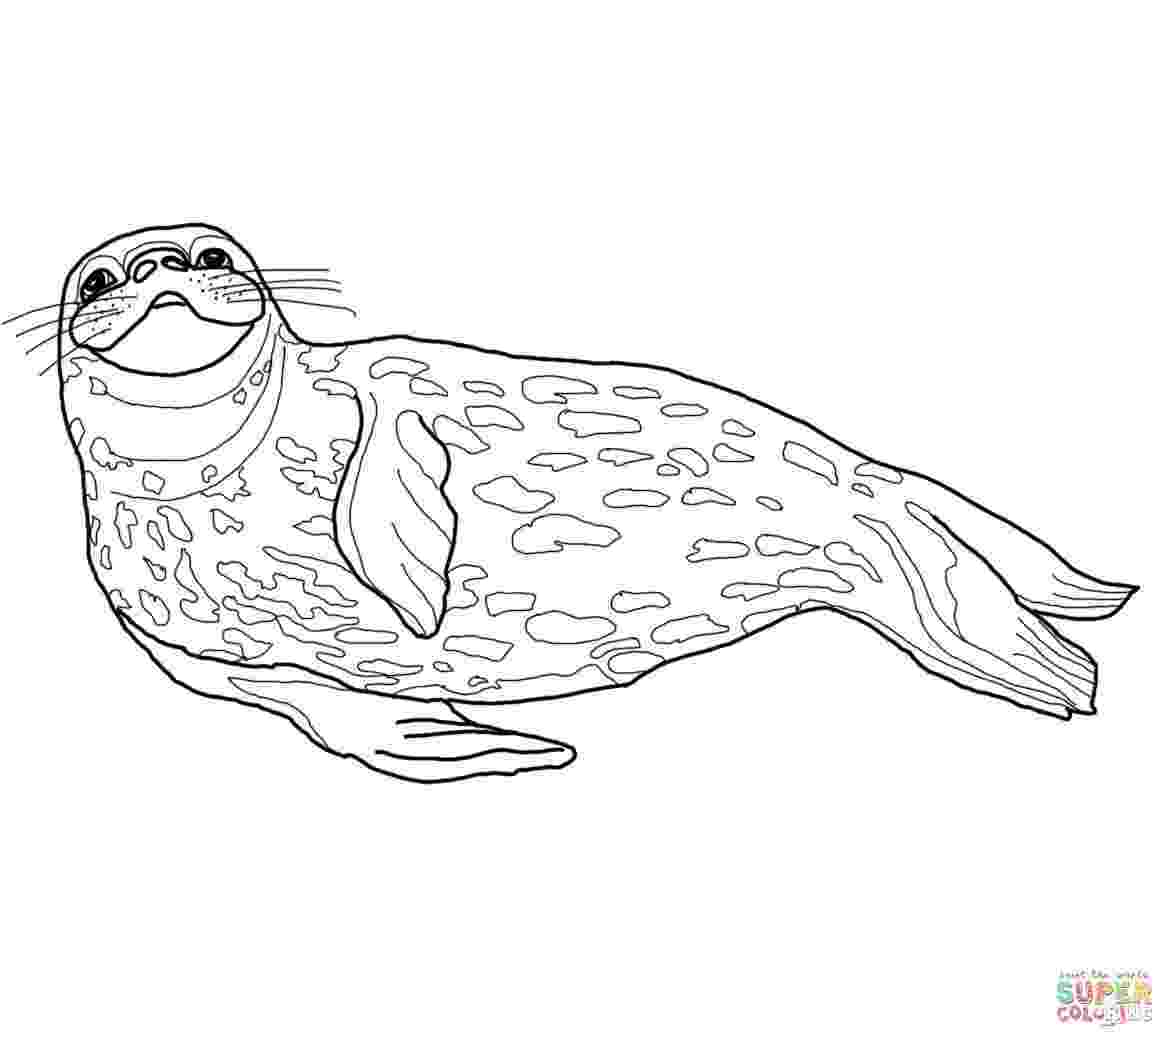 leopard seal coloring pages leopard seal coloring page free printable coloring pages leopard seal coloring pages 